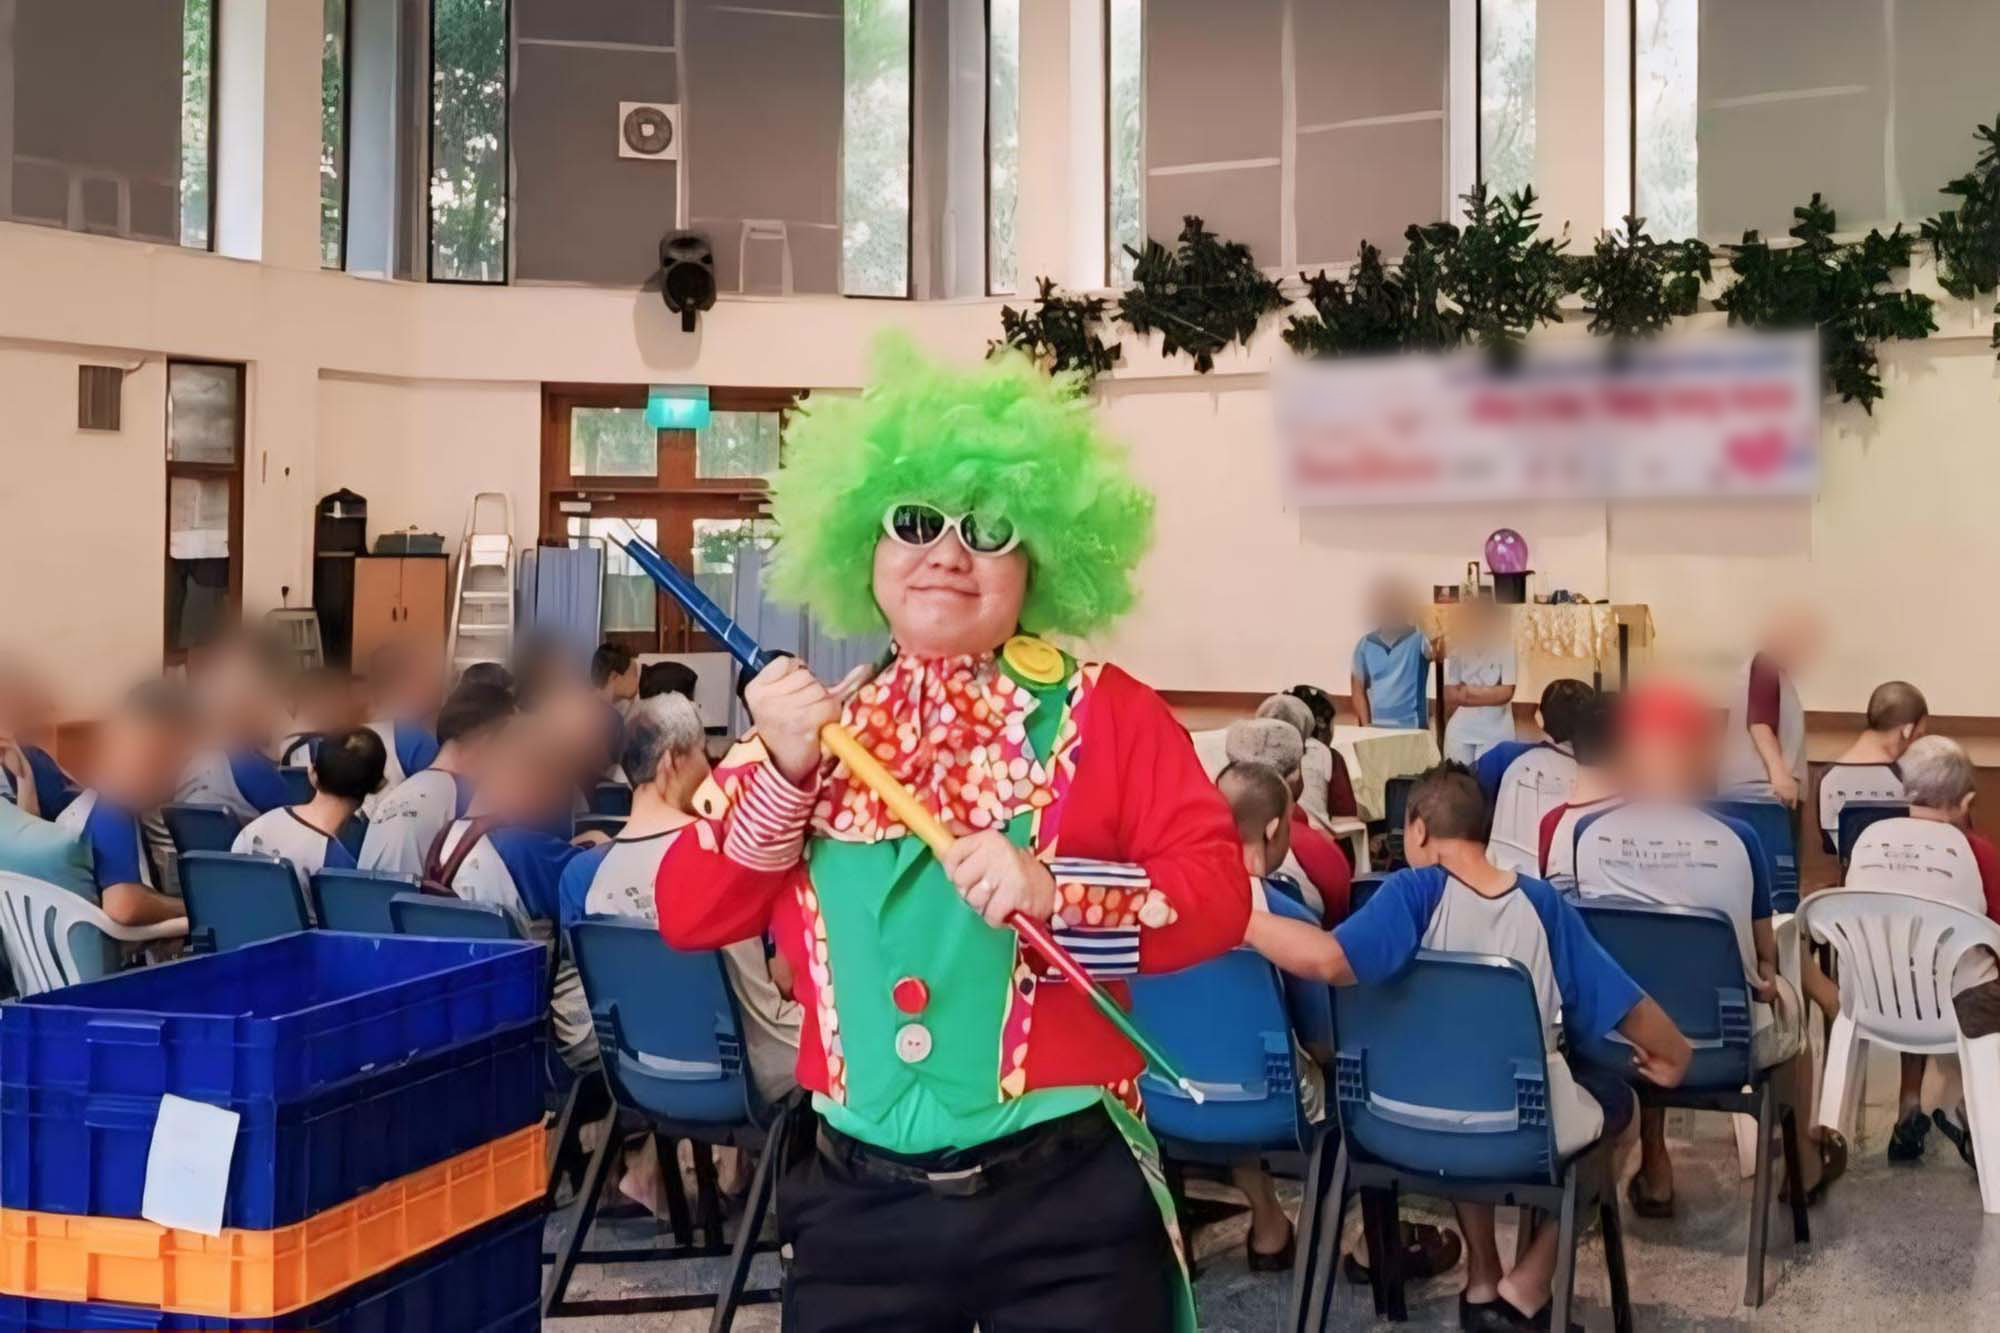 DSP jeremy ang dressed with a colourful wig standing and posing for the camera, with a lot of old people behind him in a nursing home setting